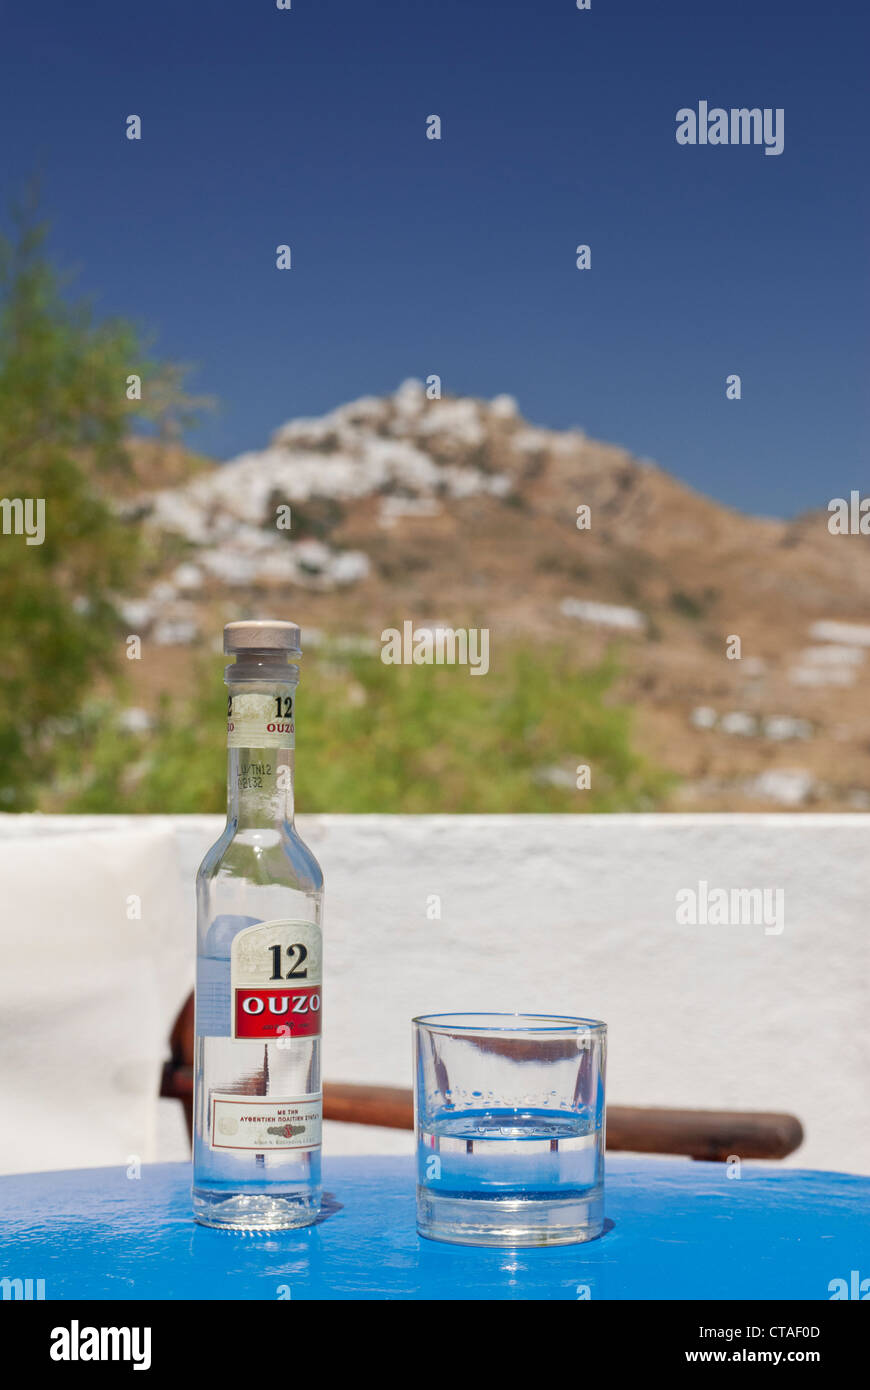 Bottle of Ouzo and glass, Serifos Island, Cyclades, Greece Stock Photo